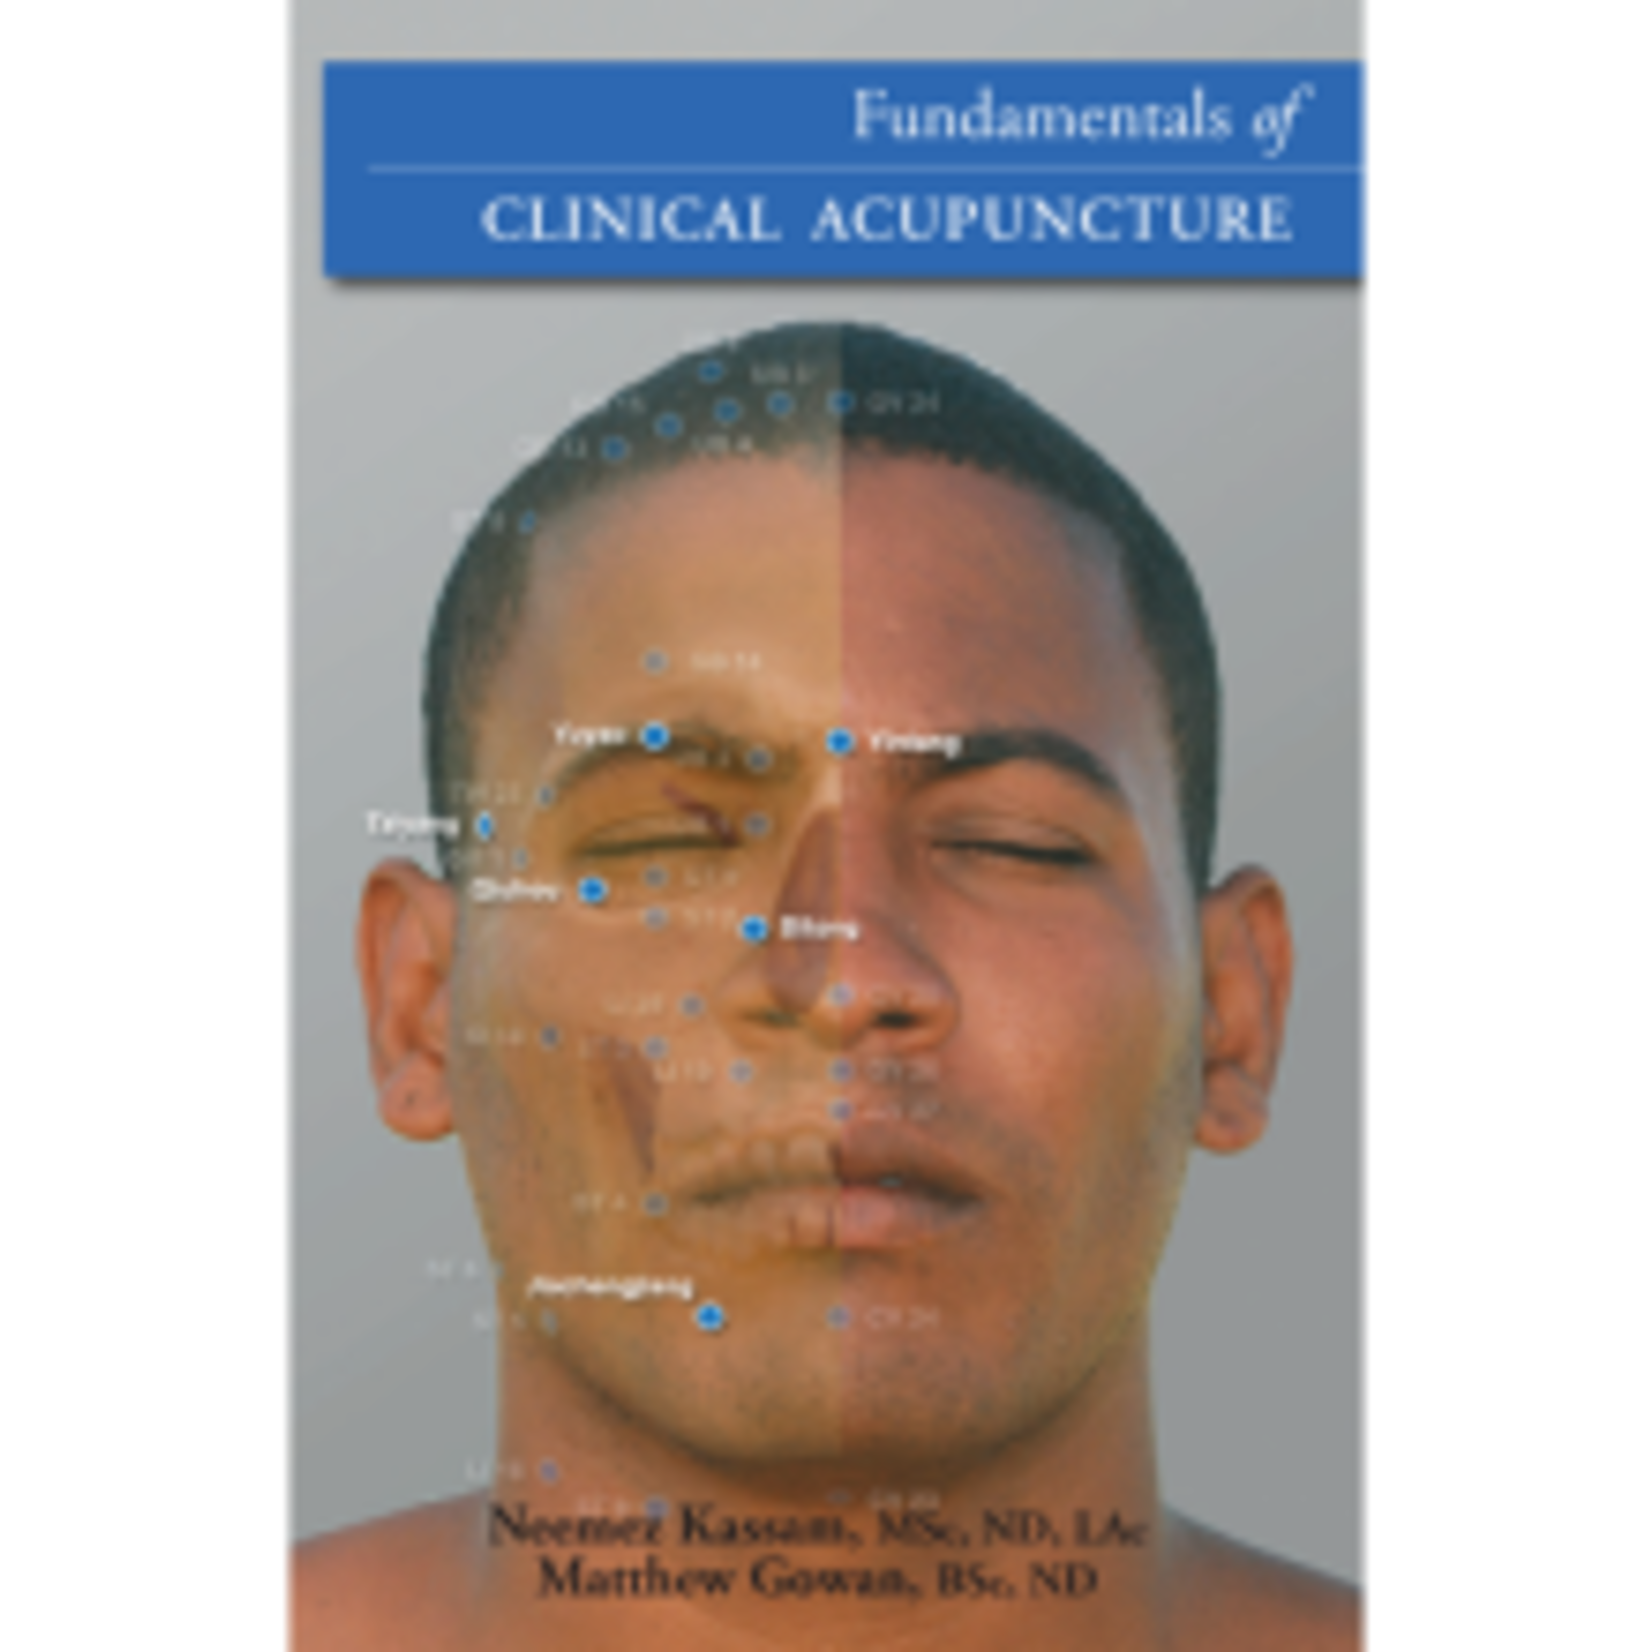 CCNM PRESS FUNDAMENTALS OF CLINICAL ACUPUNCTURE